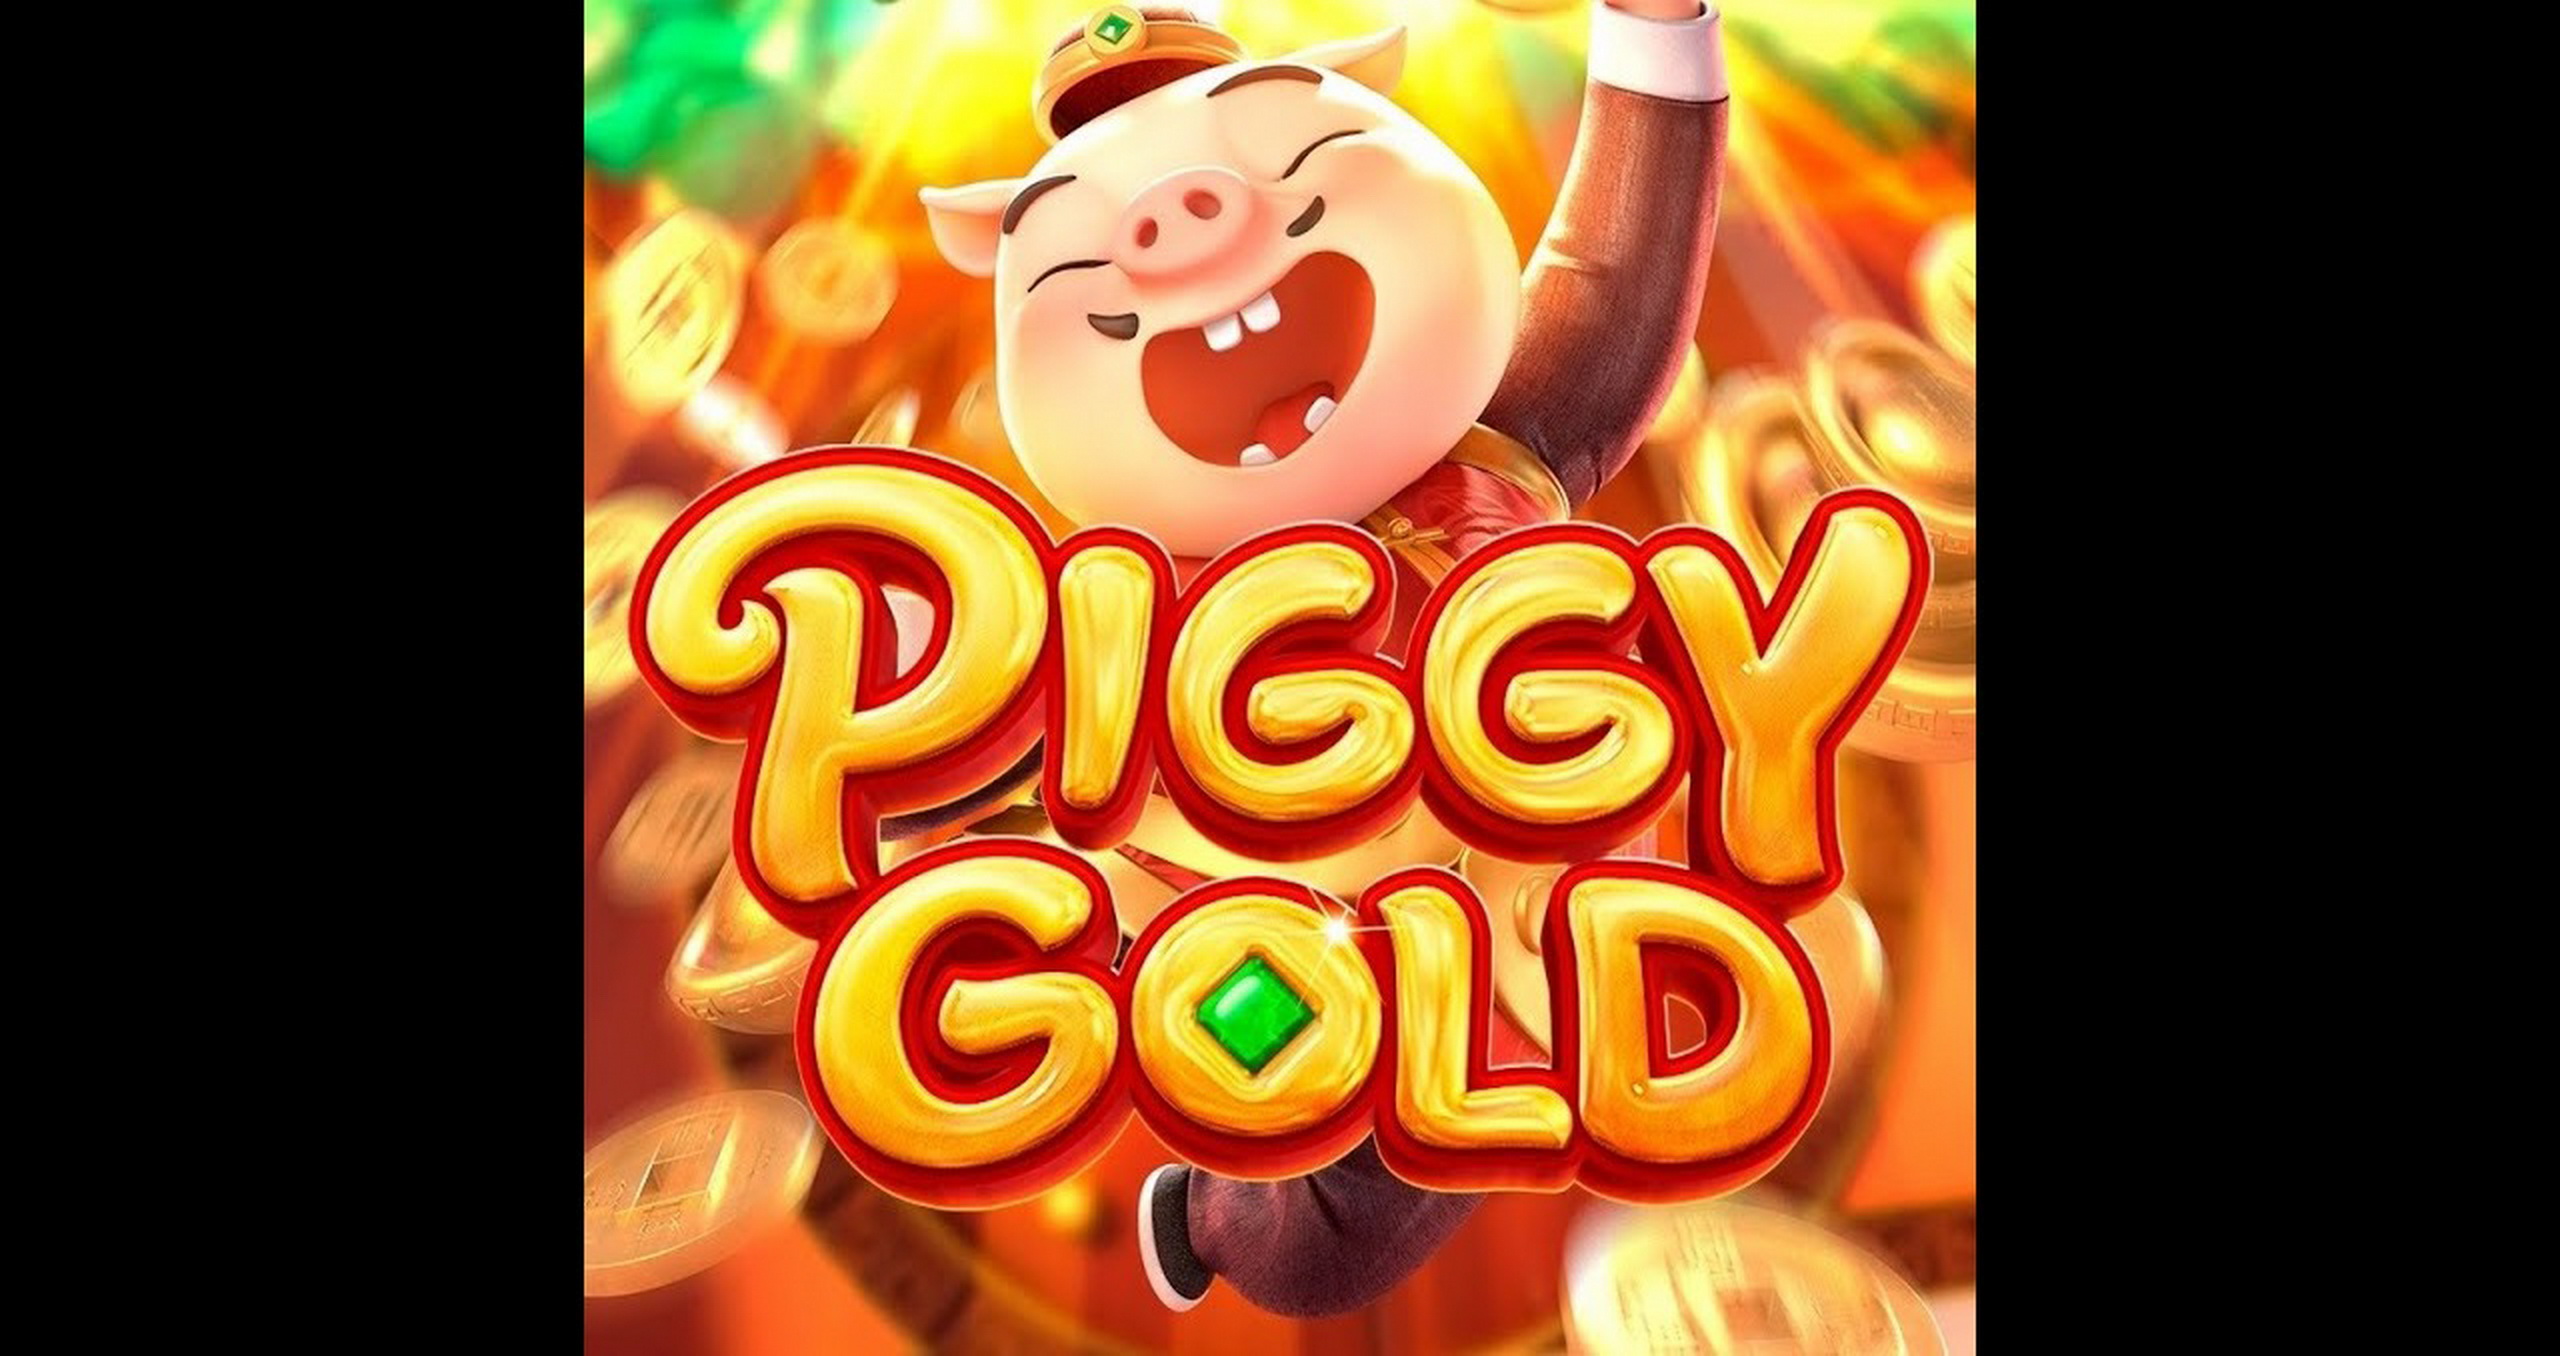 The Piggy Gold Online Slot Demo Game by PG Soft